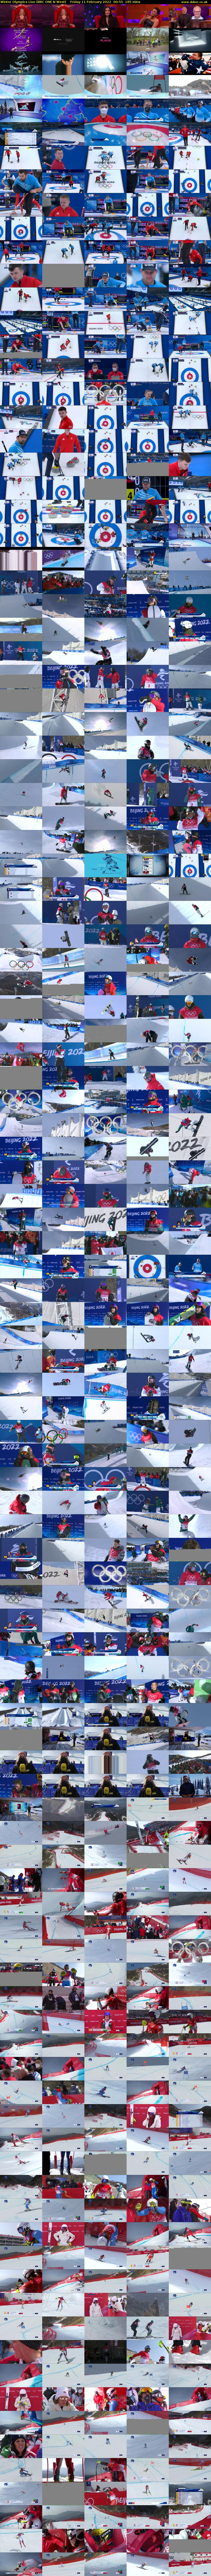 Winter Olympics Live (BBC ONE N West) Friday 11 February 2022 00:55 - 04:00